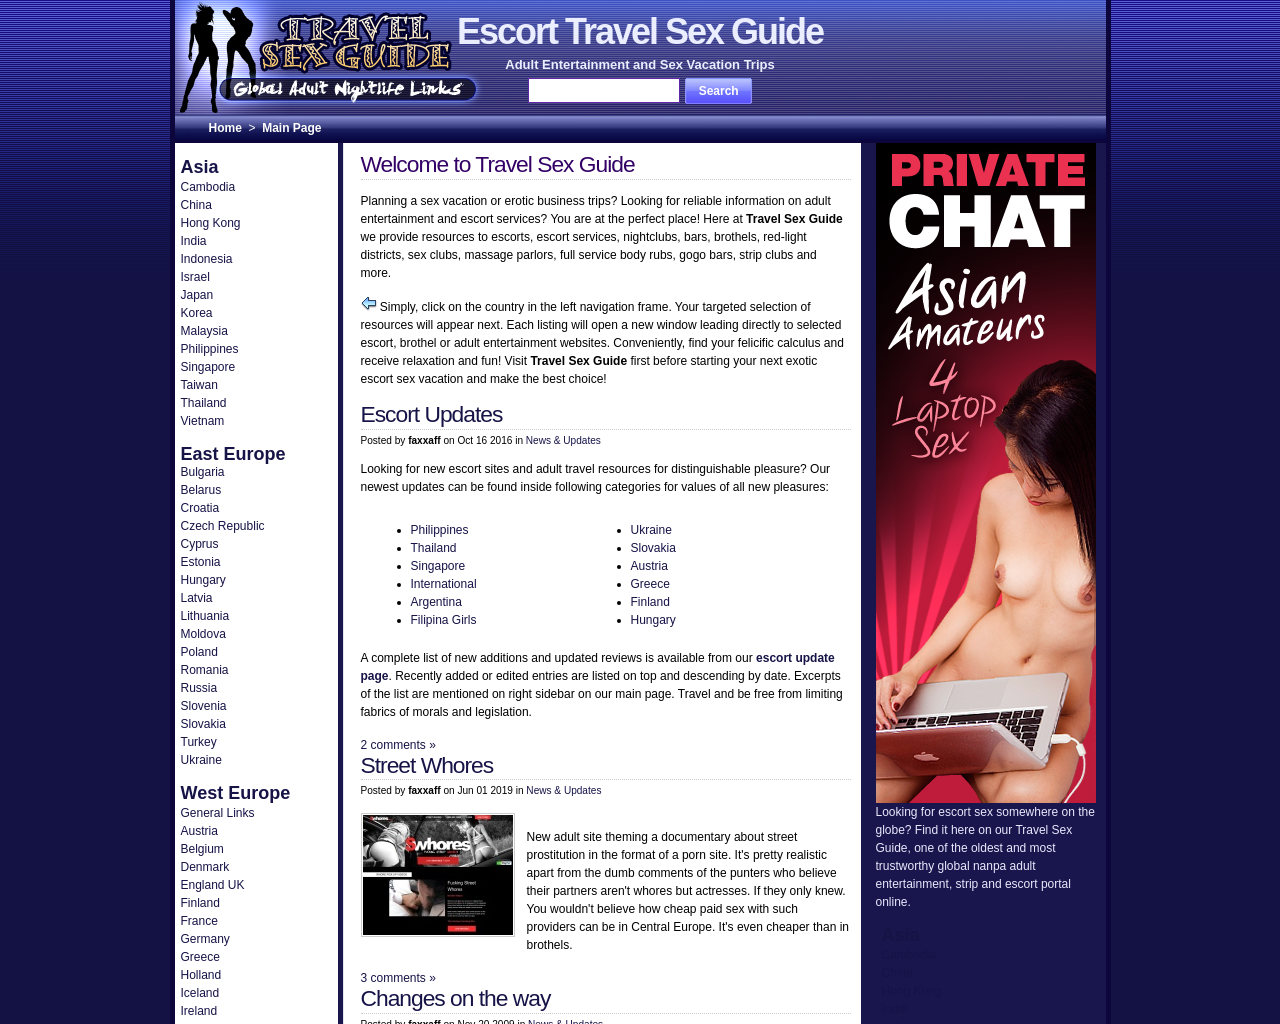 travelsexguide.tv